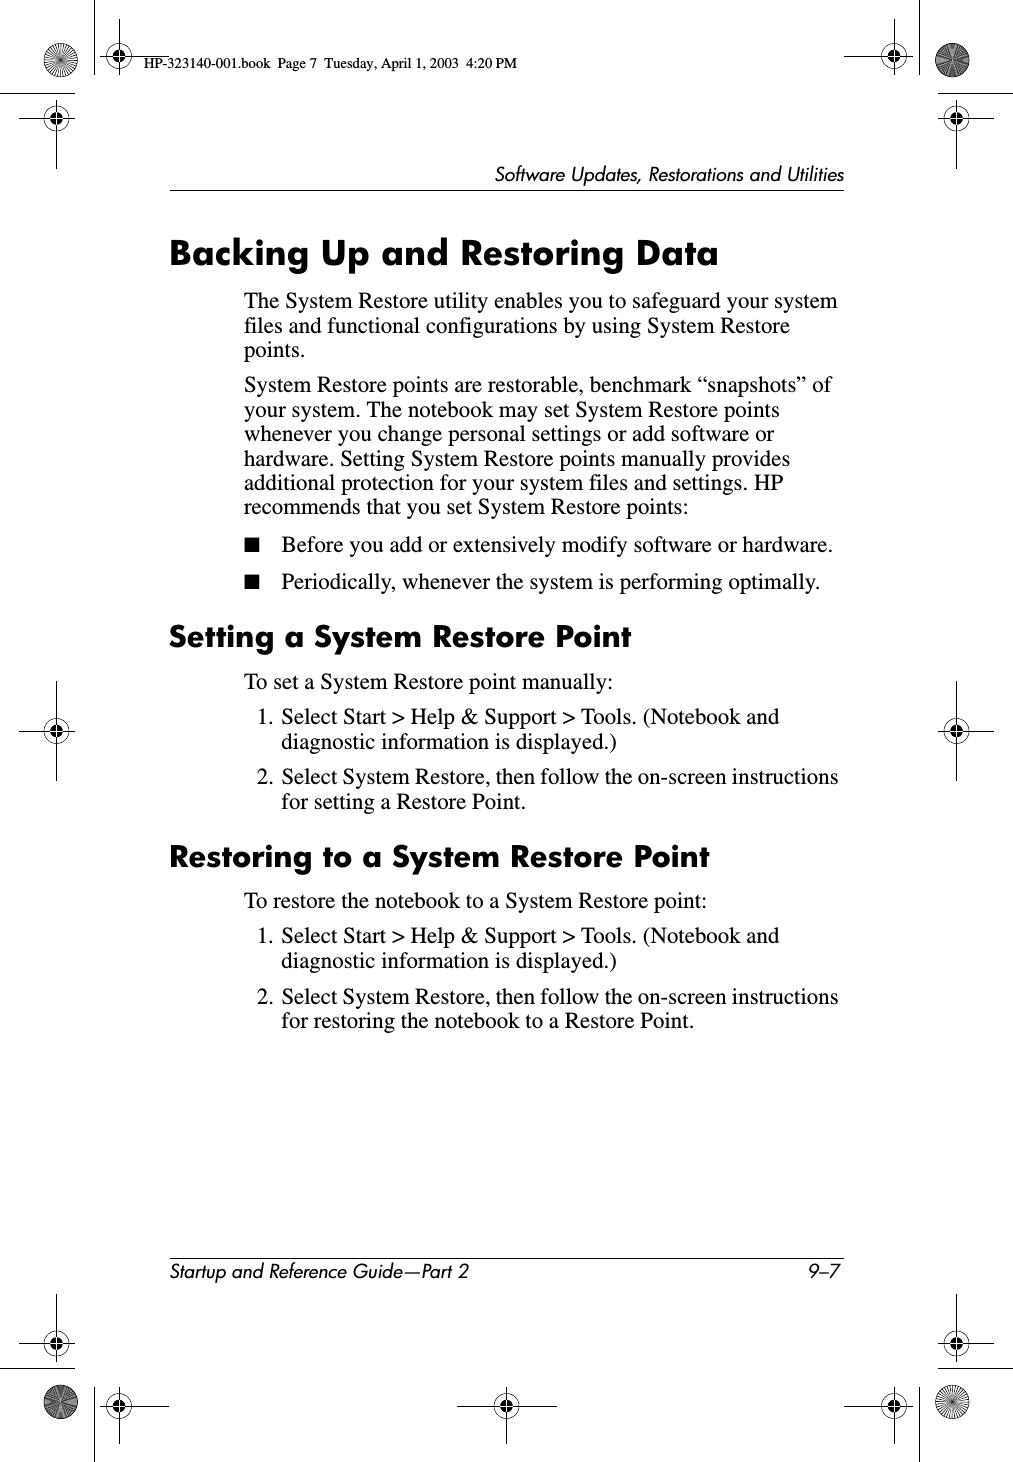 Software Updates, Restorations and UtilitiesStartup and Reference Guide—Part 2 9–7Backing Up and Restoring DataThe System Restore utility enables you to safeguard your system files and functional configurations by using System Restore points.System Restore points are restorable, benchmark “snapshots” of your system. The notebook may set System Restore points whenever you change personal settings or add software or hardware. Setting System Restore points manually provides additional protection for your system files and settings. HP recommends that you set System Restore points:■Before you add or extensively modify software or hardware.■Periodically, whenever the system is performing optimally.Setting a System Restore PointTo set a System Restore point manually:1. Select Start &gt; Help &amp; Support &gt; Tools. (Notebook and diagnostic information is displayed.) 2. Select System Restore, then follow the on-screen instructions for setting a Restore Point.Restoring to a System Restore PointTo restore the notebook to a System Restore point:1. Select Start &gt; Help &amp; Support &gt; Tools. (Notebook and diagnostic information is displayed.) 2. Select System Restore, then follow the on-screen instructions for restoring the notebook to a Restore Point.HP-323140-001.book  Page 7  Tuesday, April 1, 2003  4:20 PM